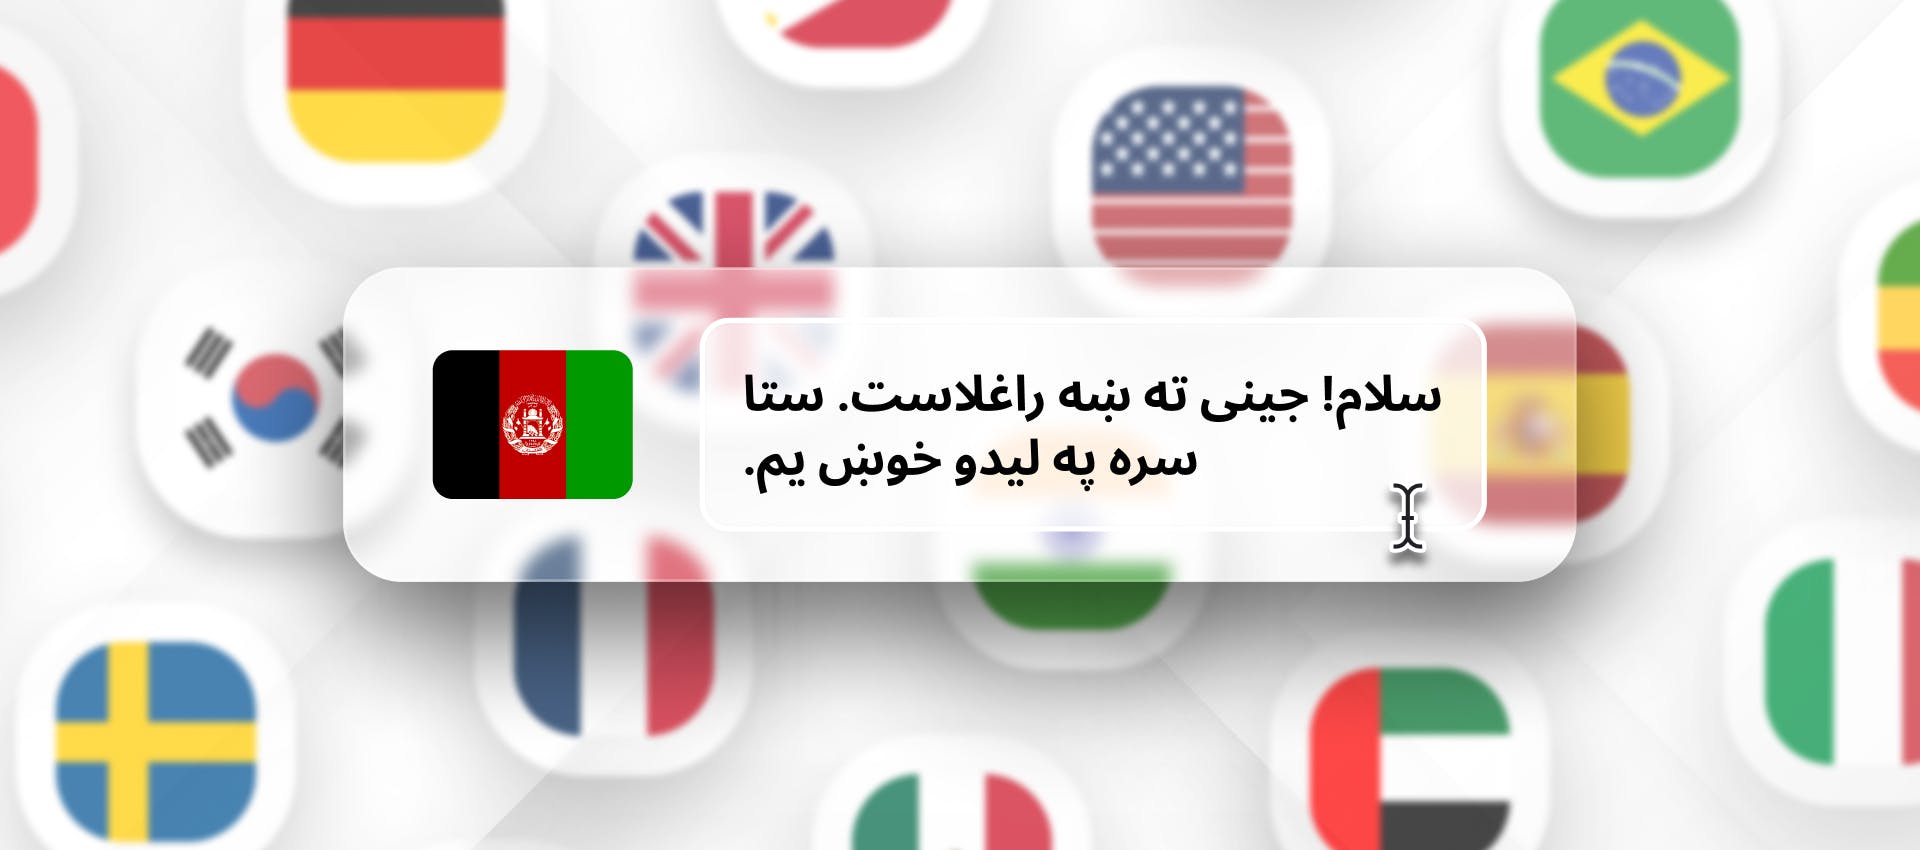 Pashto phrase for Pashto TTS generation with different flags in the background